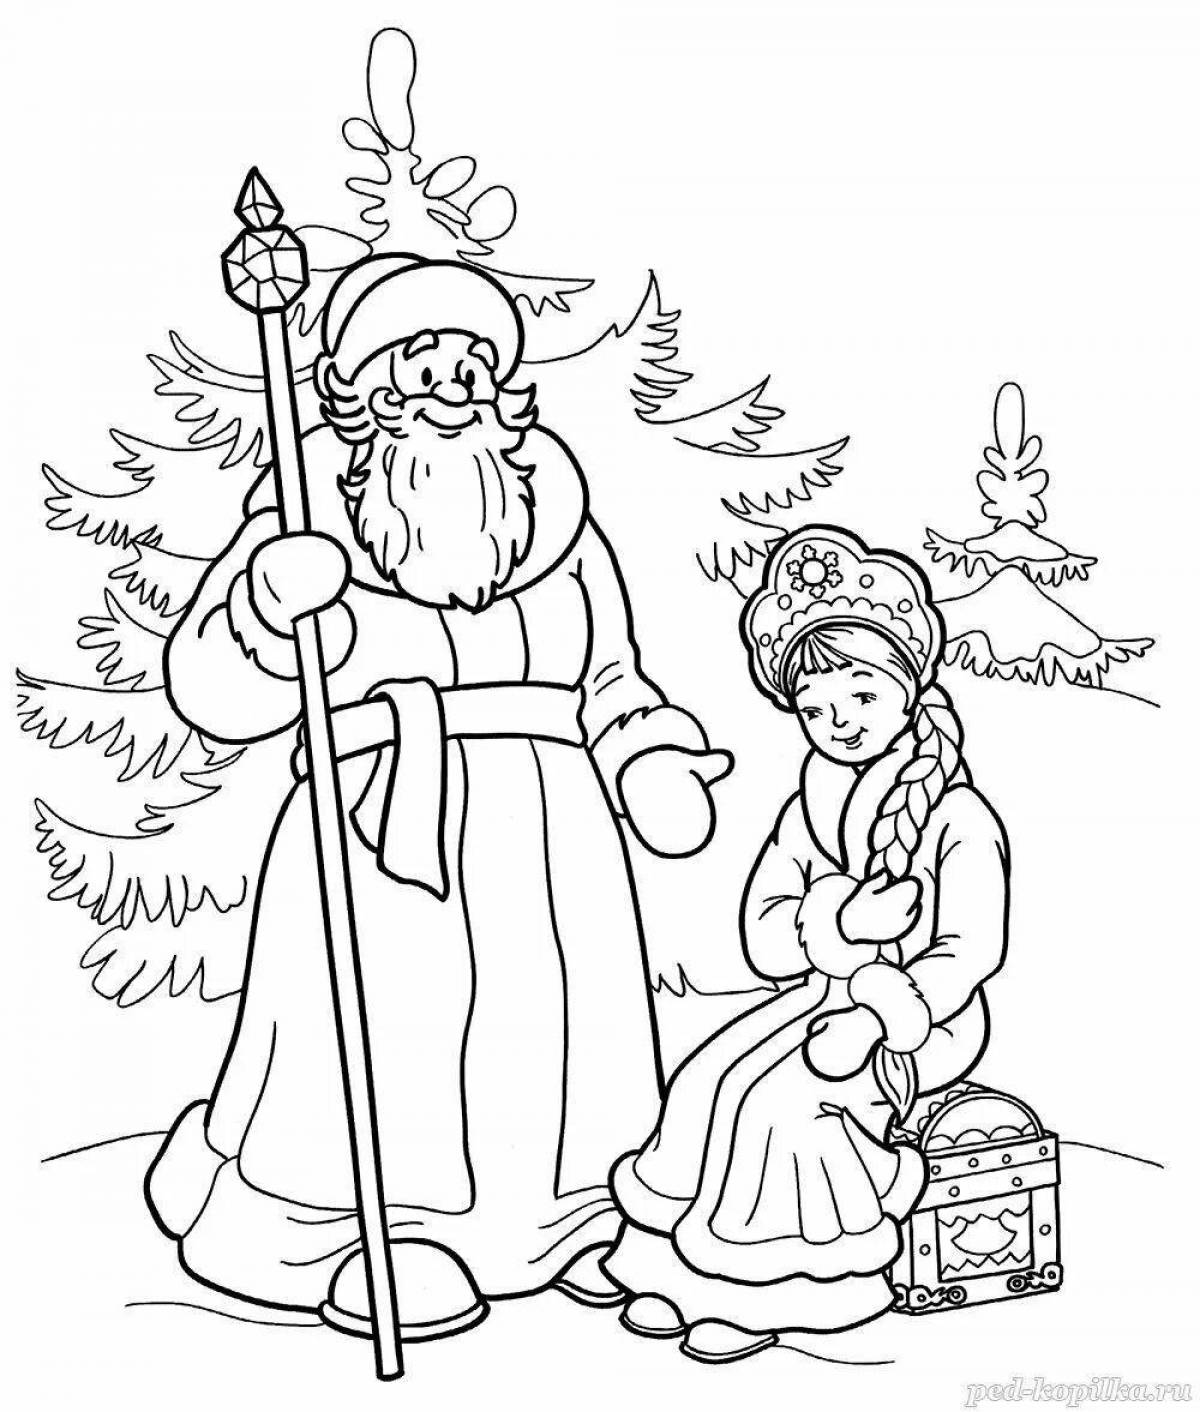 Cute coloring page 2 frosty fairy tale